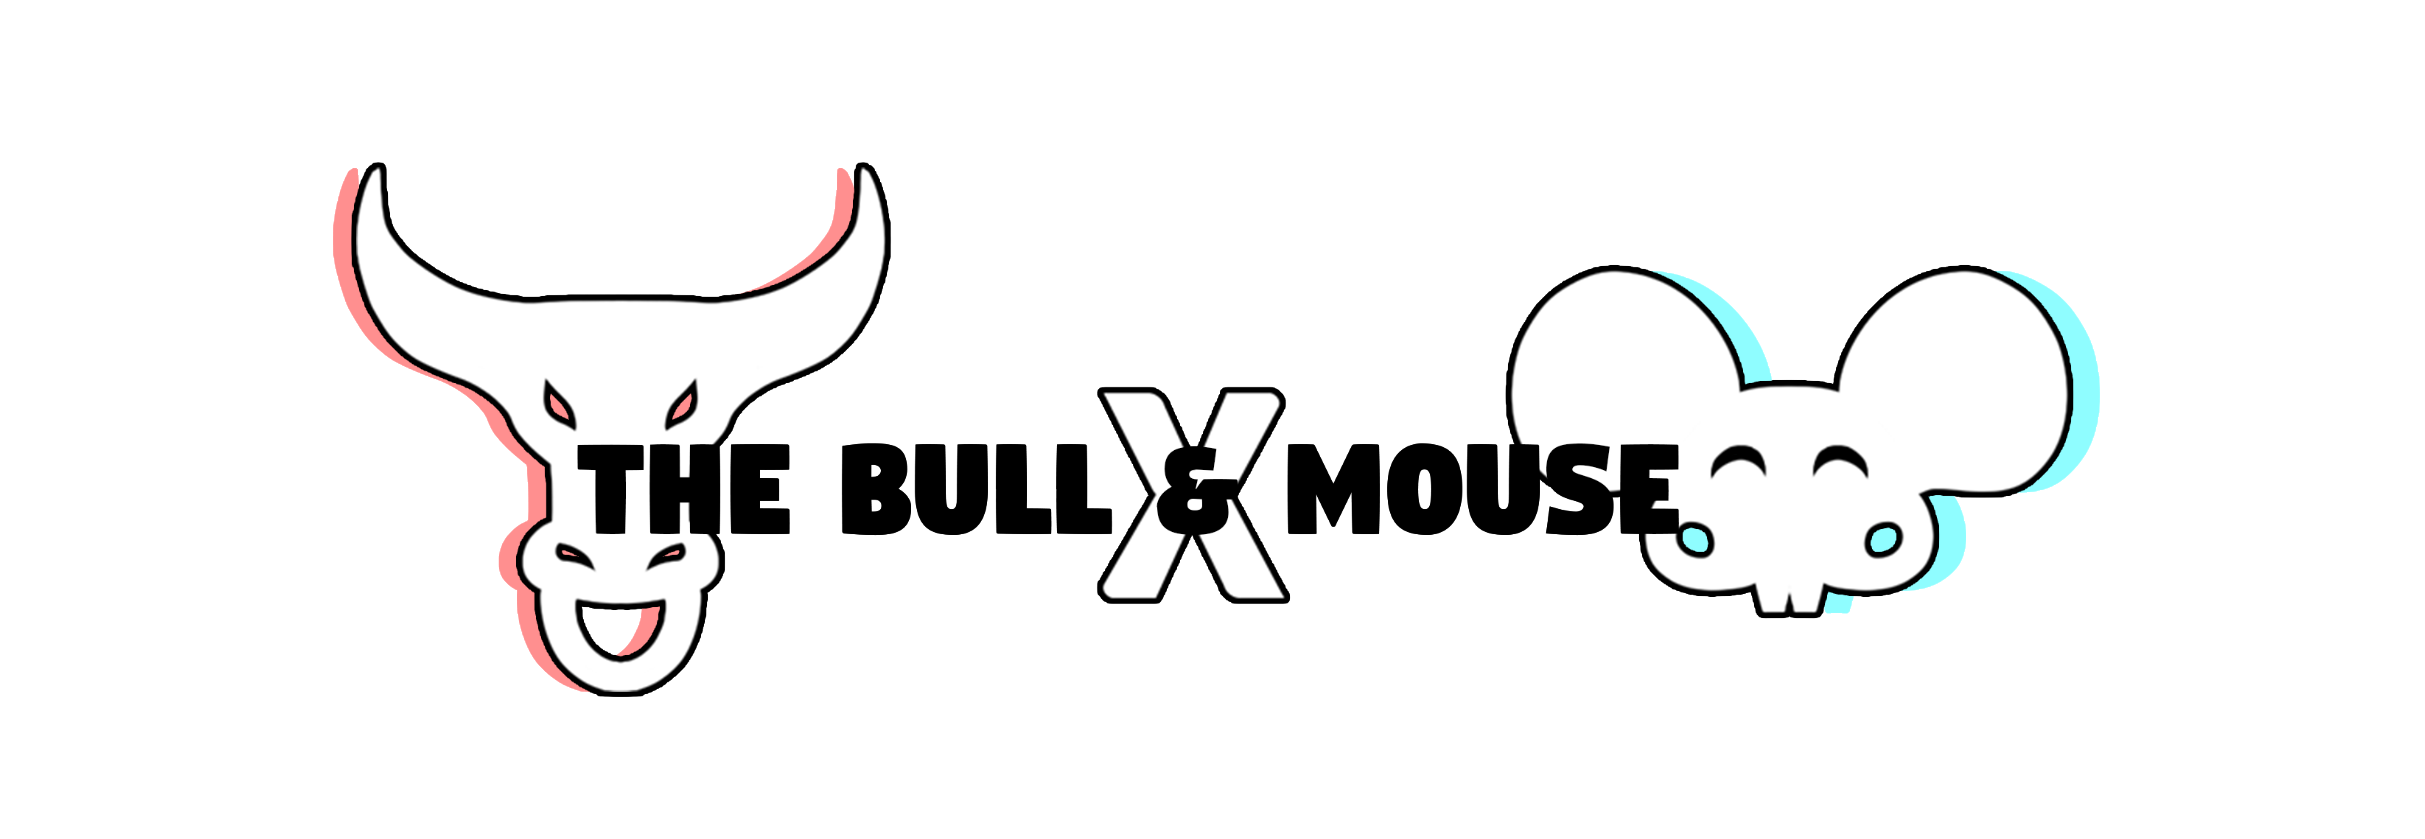 The Bull and Mouse